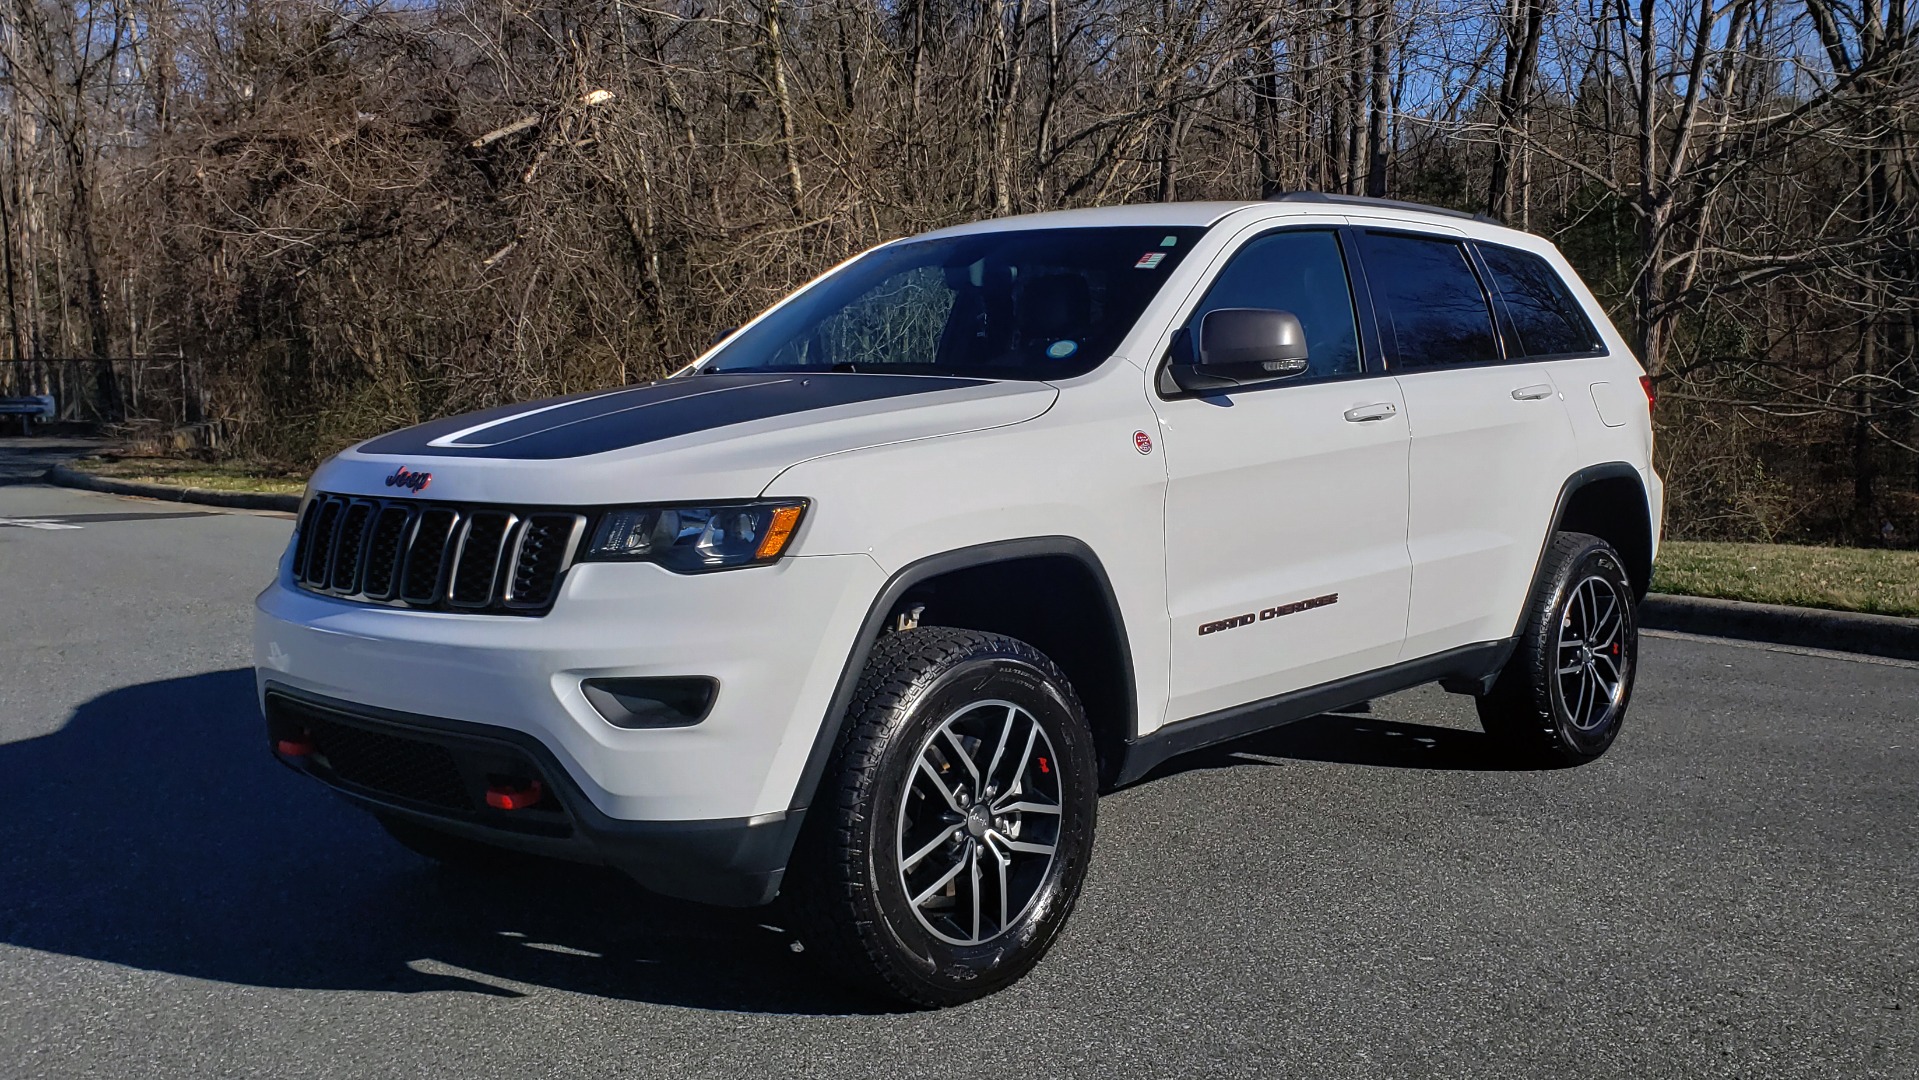 Used 2018 Jeep GRAND CHEROKEE TRAILHAWK 4X4 / NAV / REARVIEW / V6 / AUTO for sale Sold at Formula Imports in Charlotte NC 28227 1